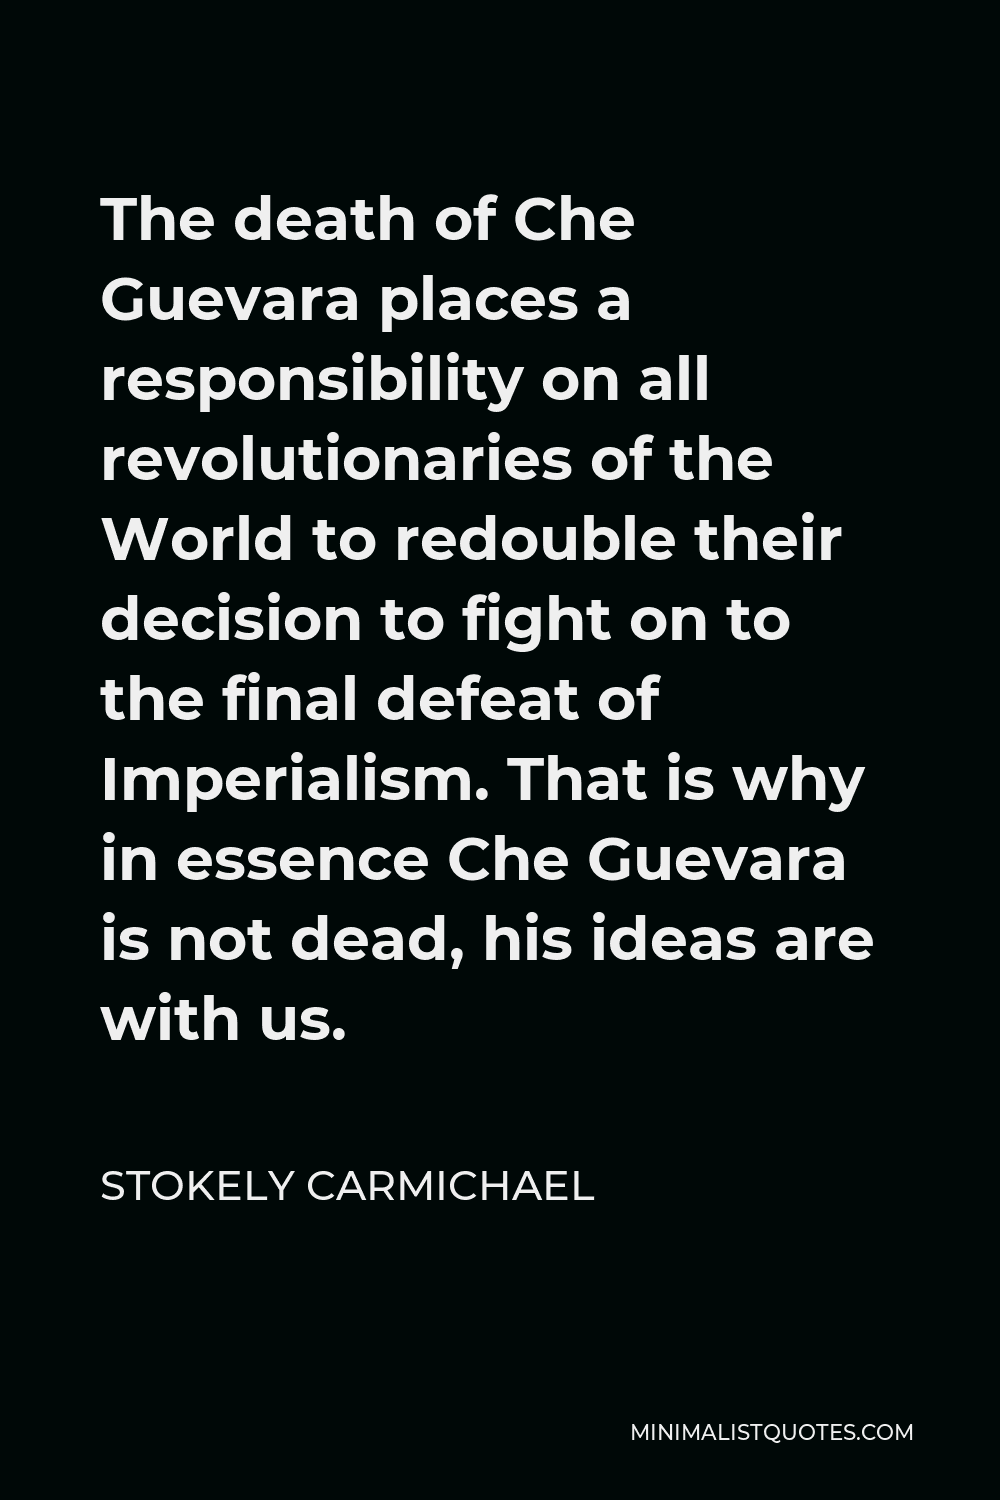 Stokely Carmichael Quote - The death of Che Guevara places a responsibility on all revolutionaries of the World to redouble their decision to fight on to the final defeat of Imperialism. That is why in essence Che Guevara is not dead, his ideas are with us.